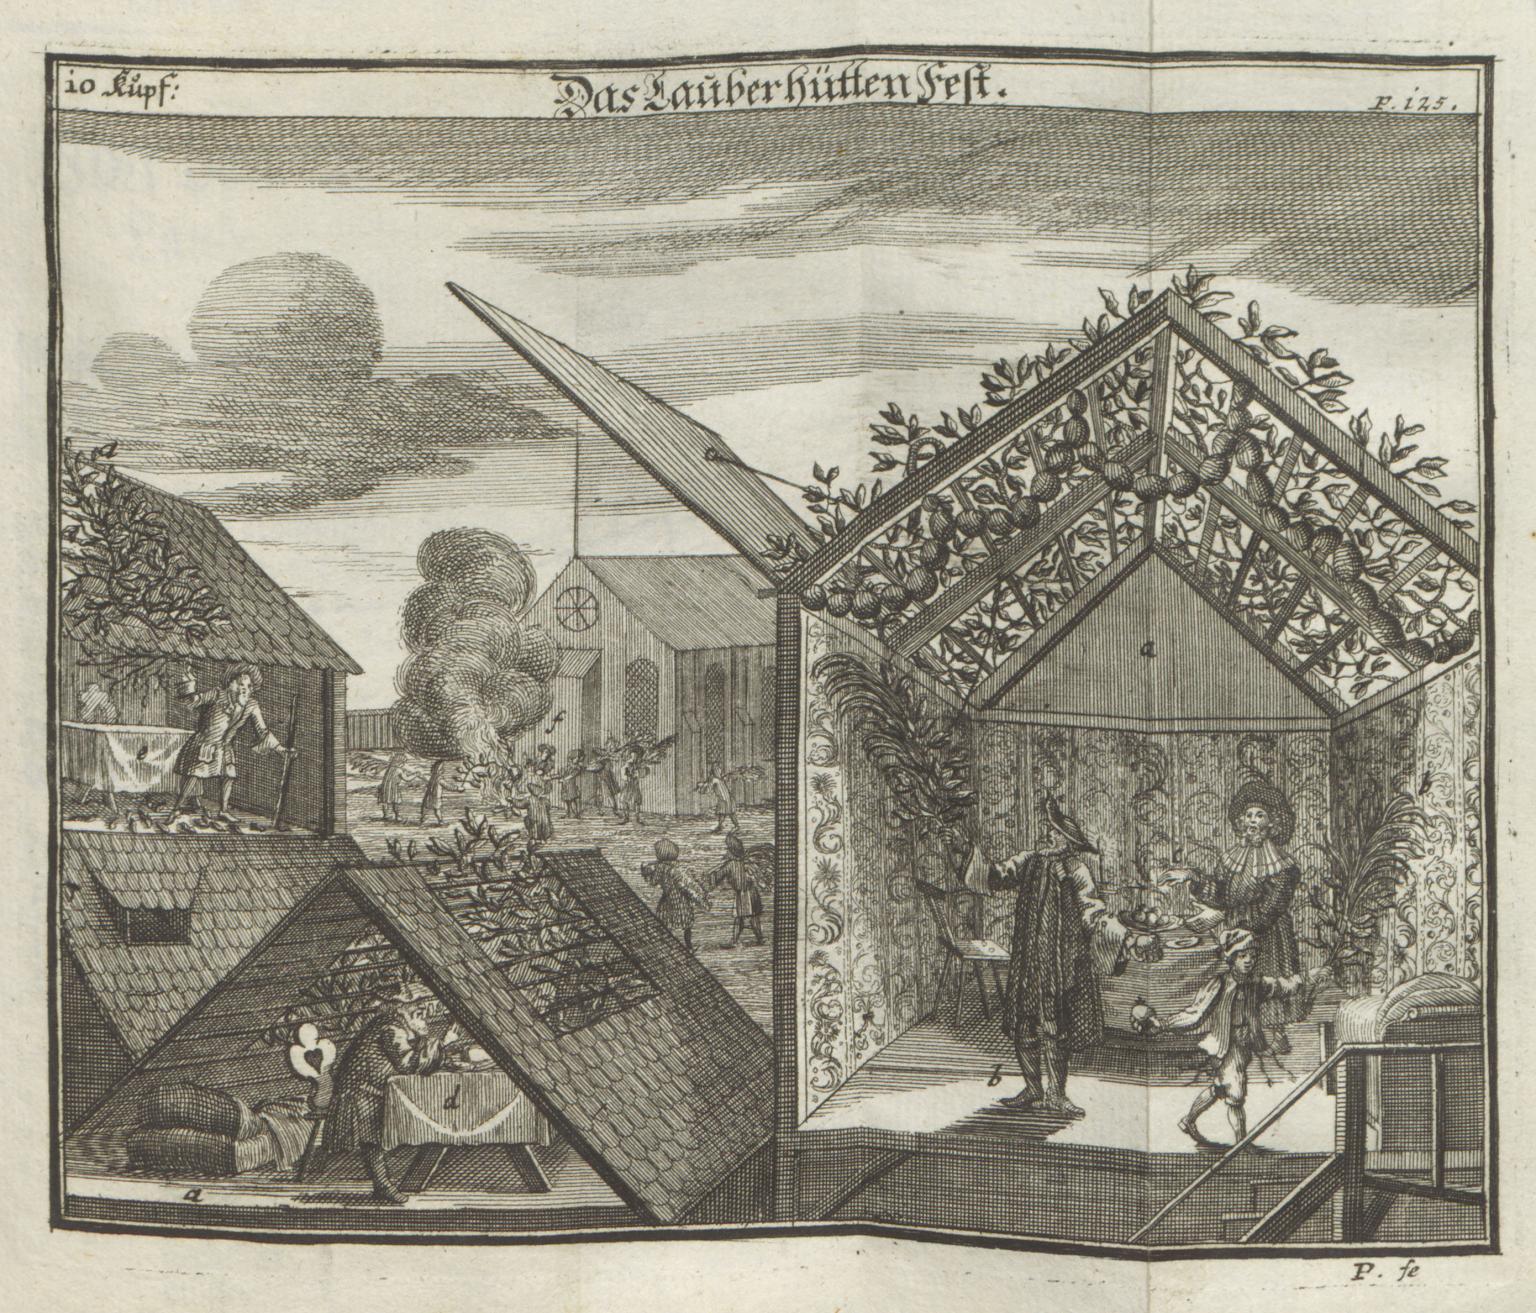 Print of several tabernacles with people inside in the foreground and a bonfire in the background. 